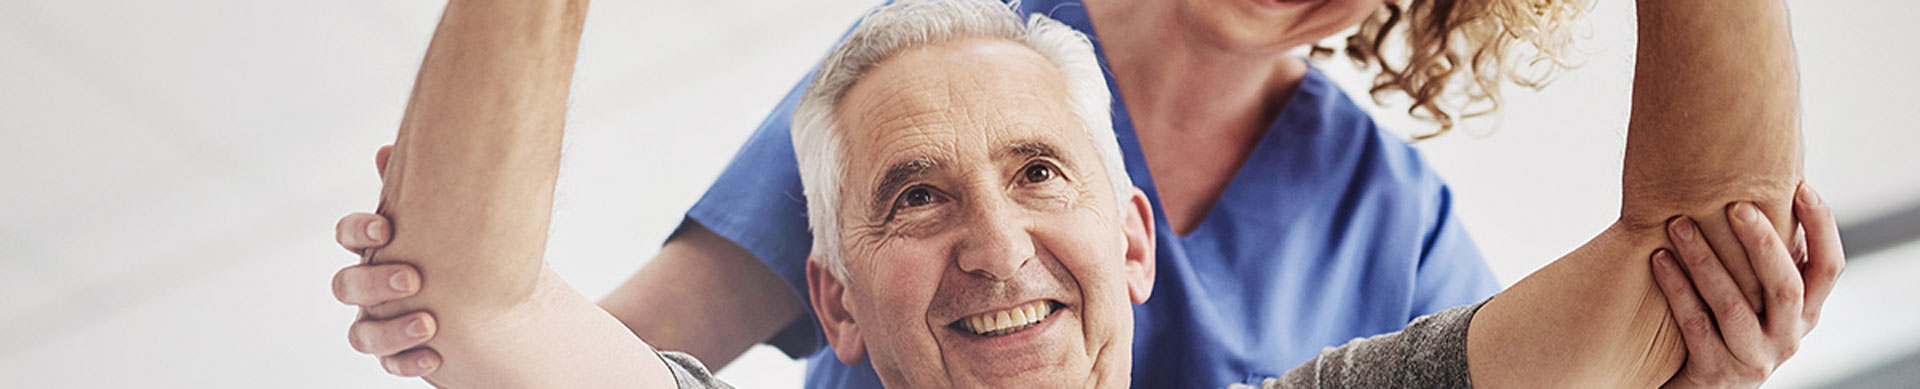 Senior man doing physical therapy exercises with help of caregiver